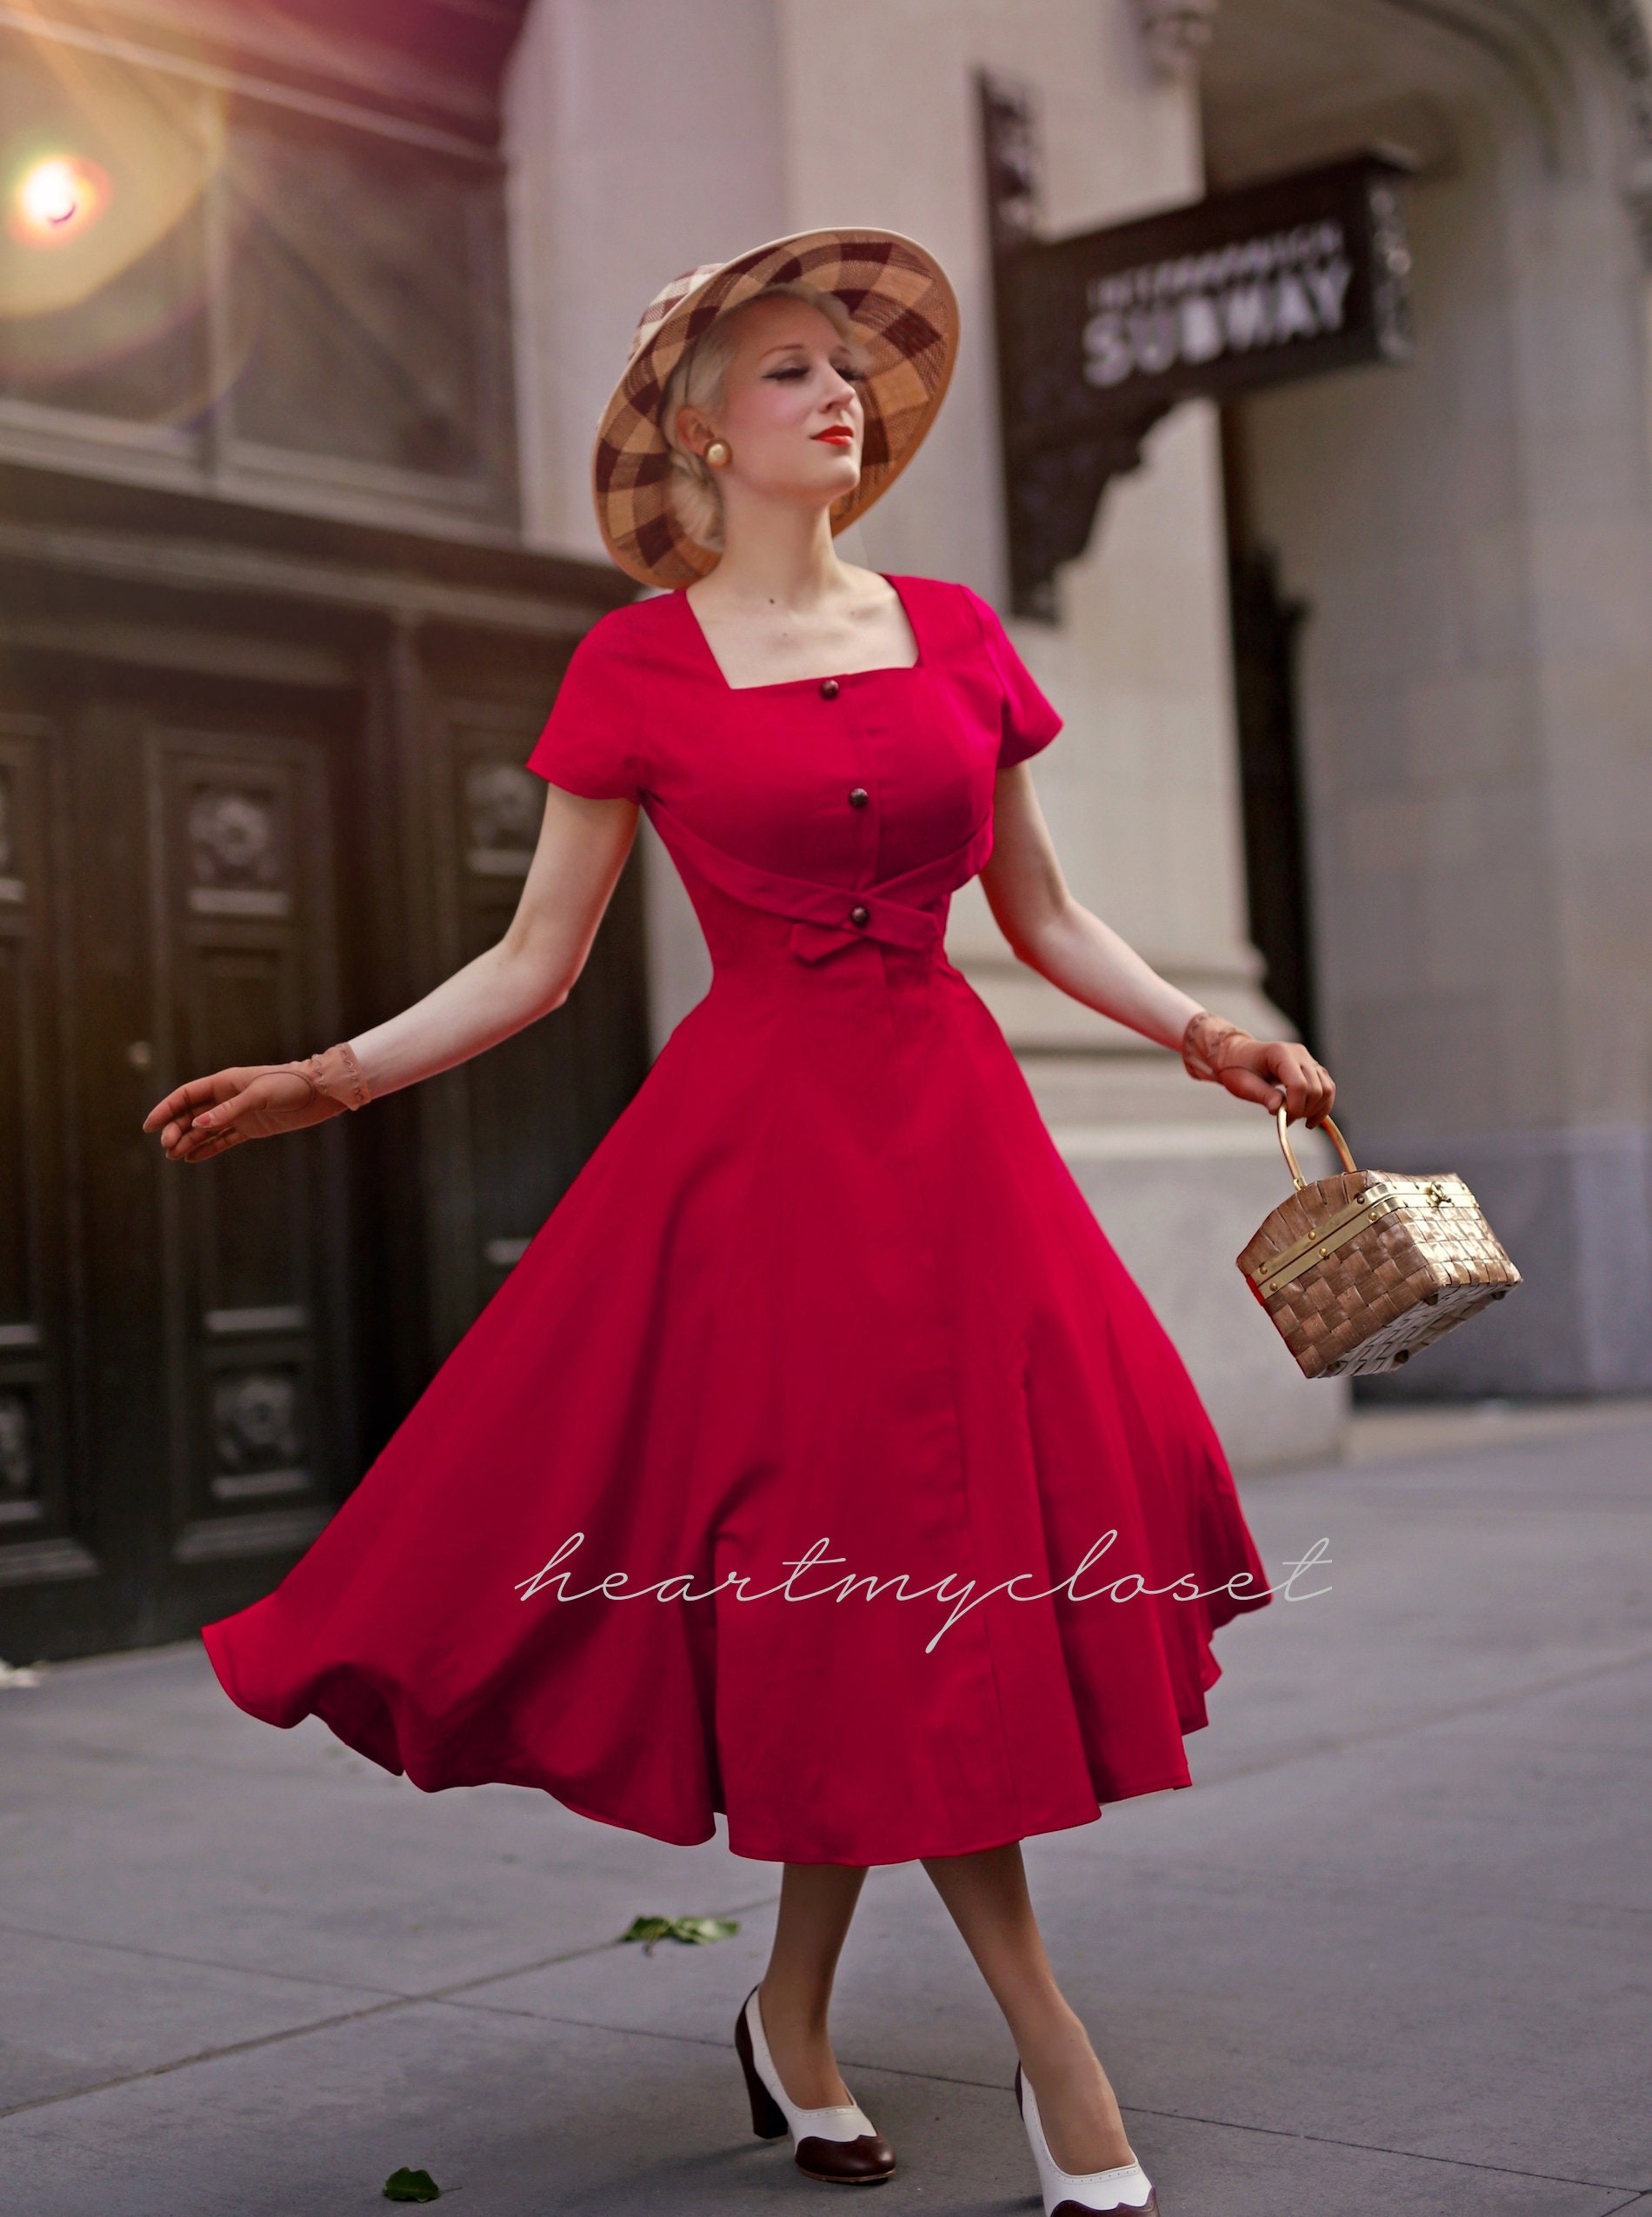 1950s Fashion, 1950s Clothing, My Vintage, 50s Dresses